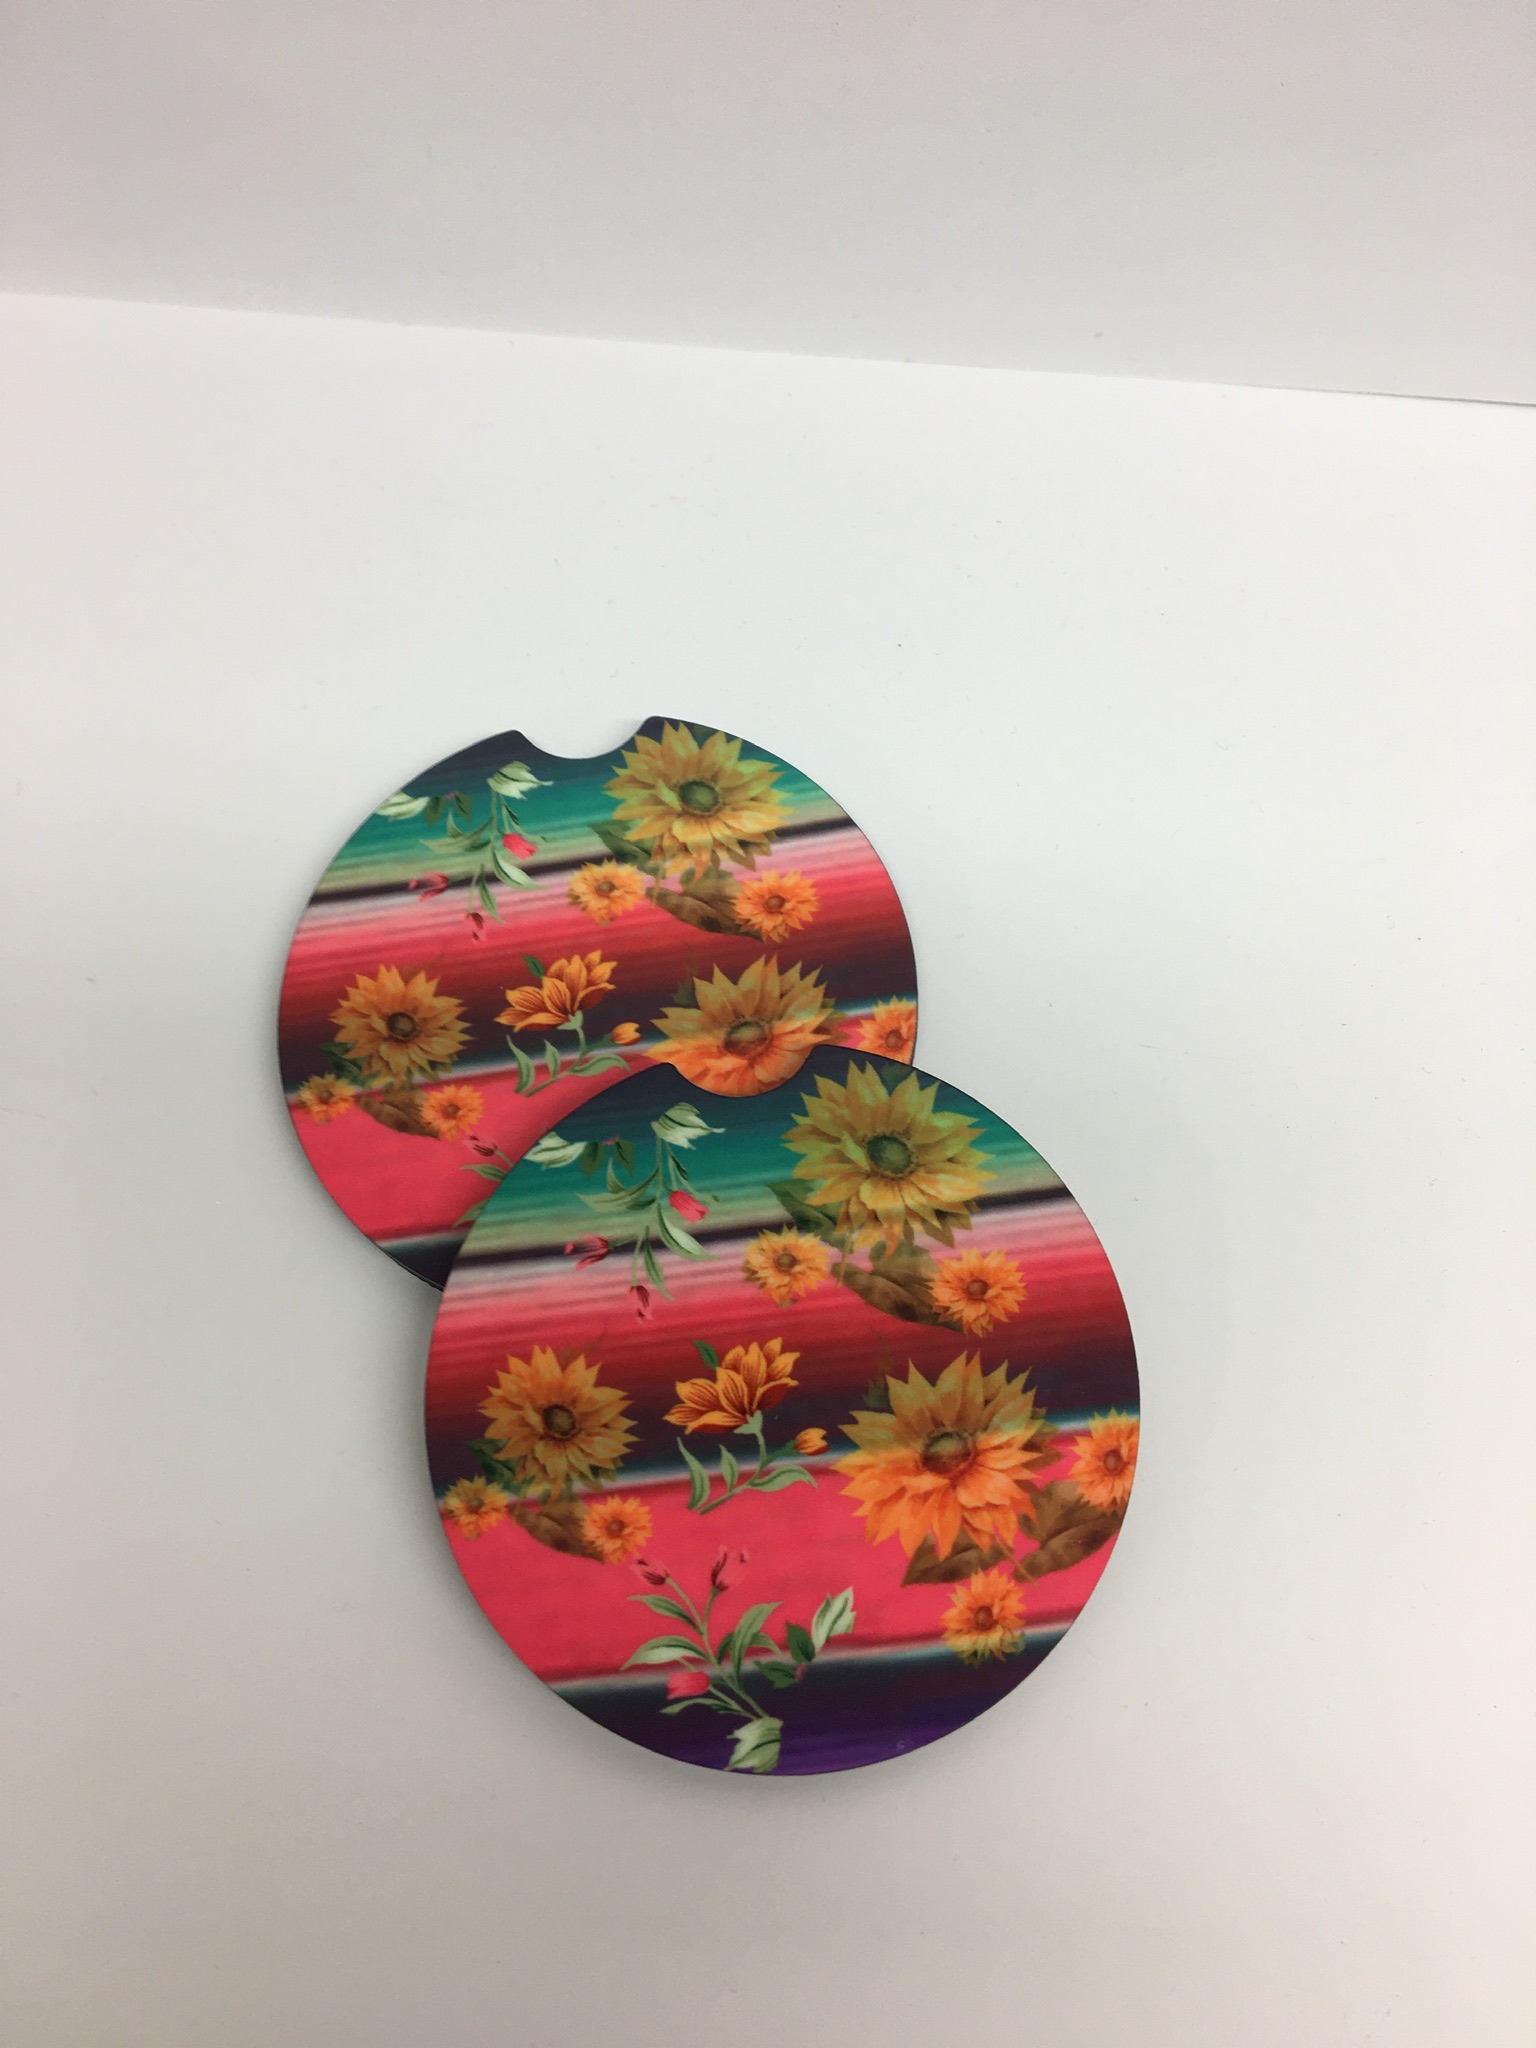 Car coaster made with sublimation printing